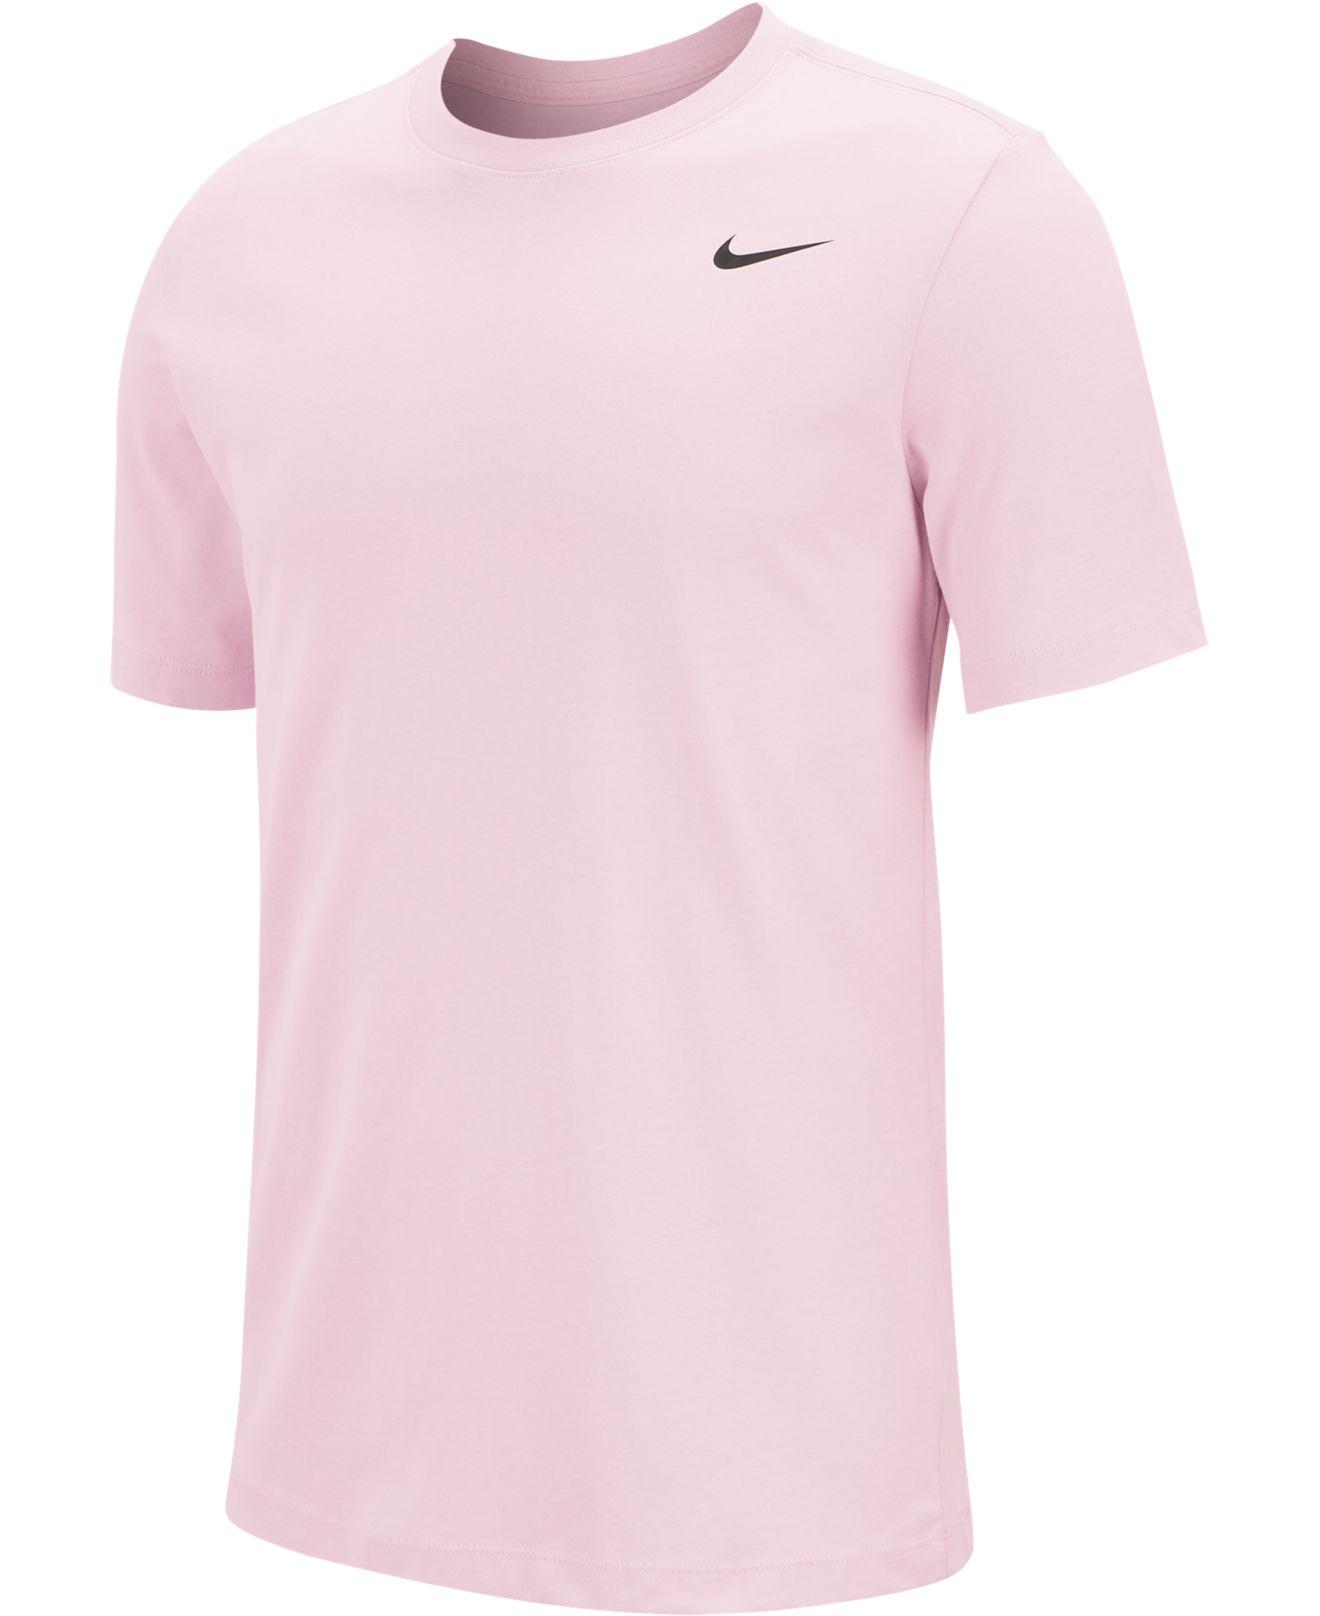 Nike Dry Tee Dri-fittm Cotton Crew Solid (pink Foam/pale Pink/black) T Shirt  for Men | Lyst